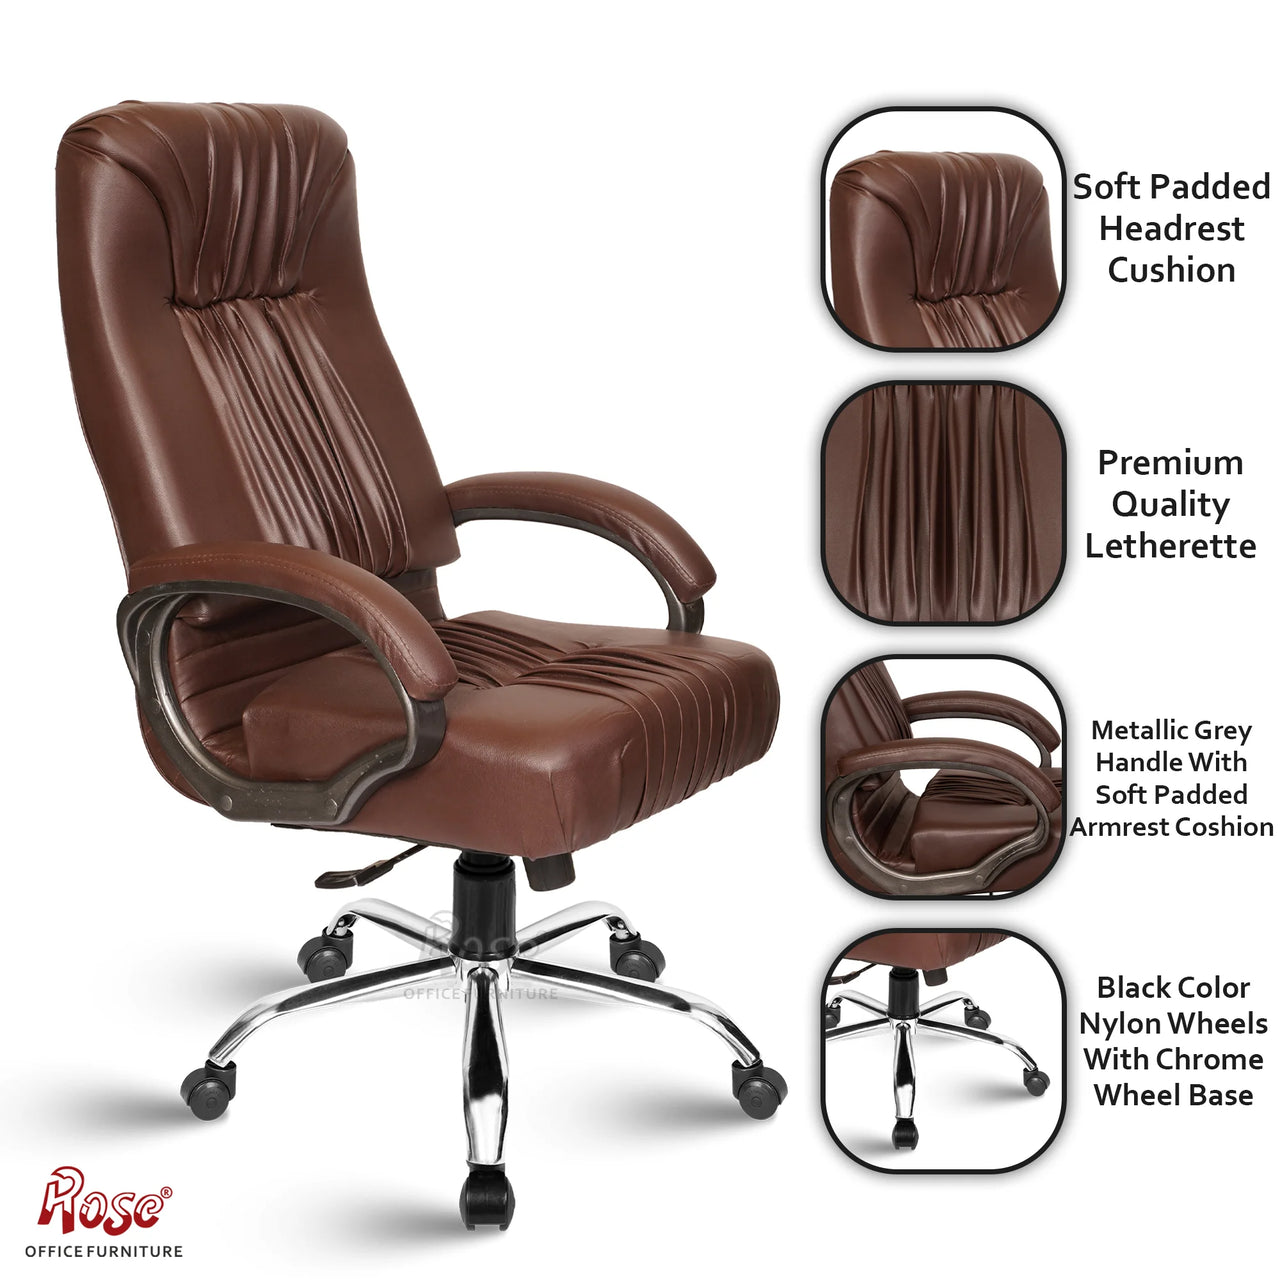 Black Beauty Leatherette Executive High Back Revolving Office Chair (Brown)